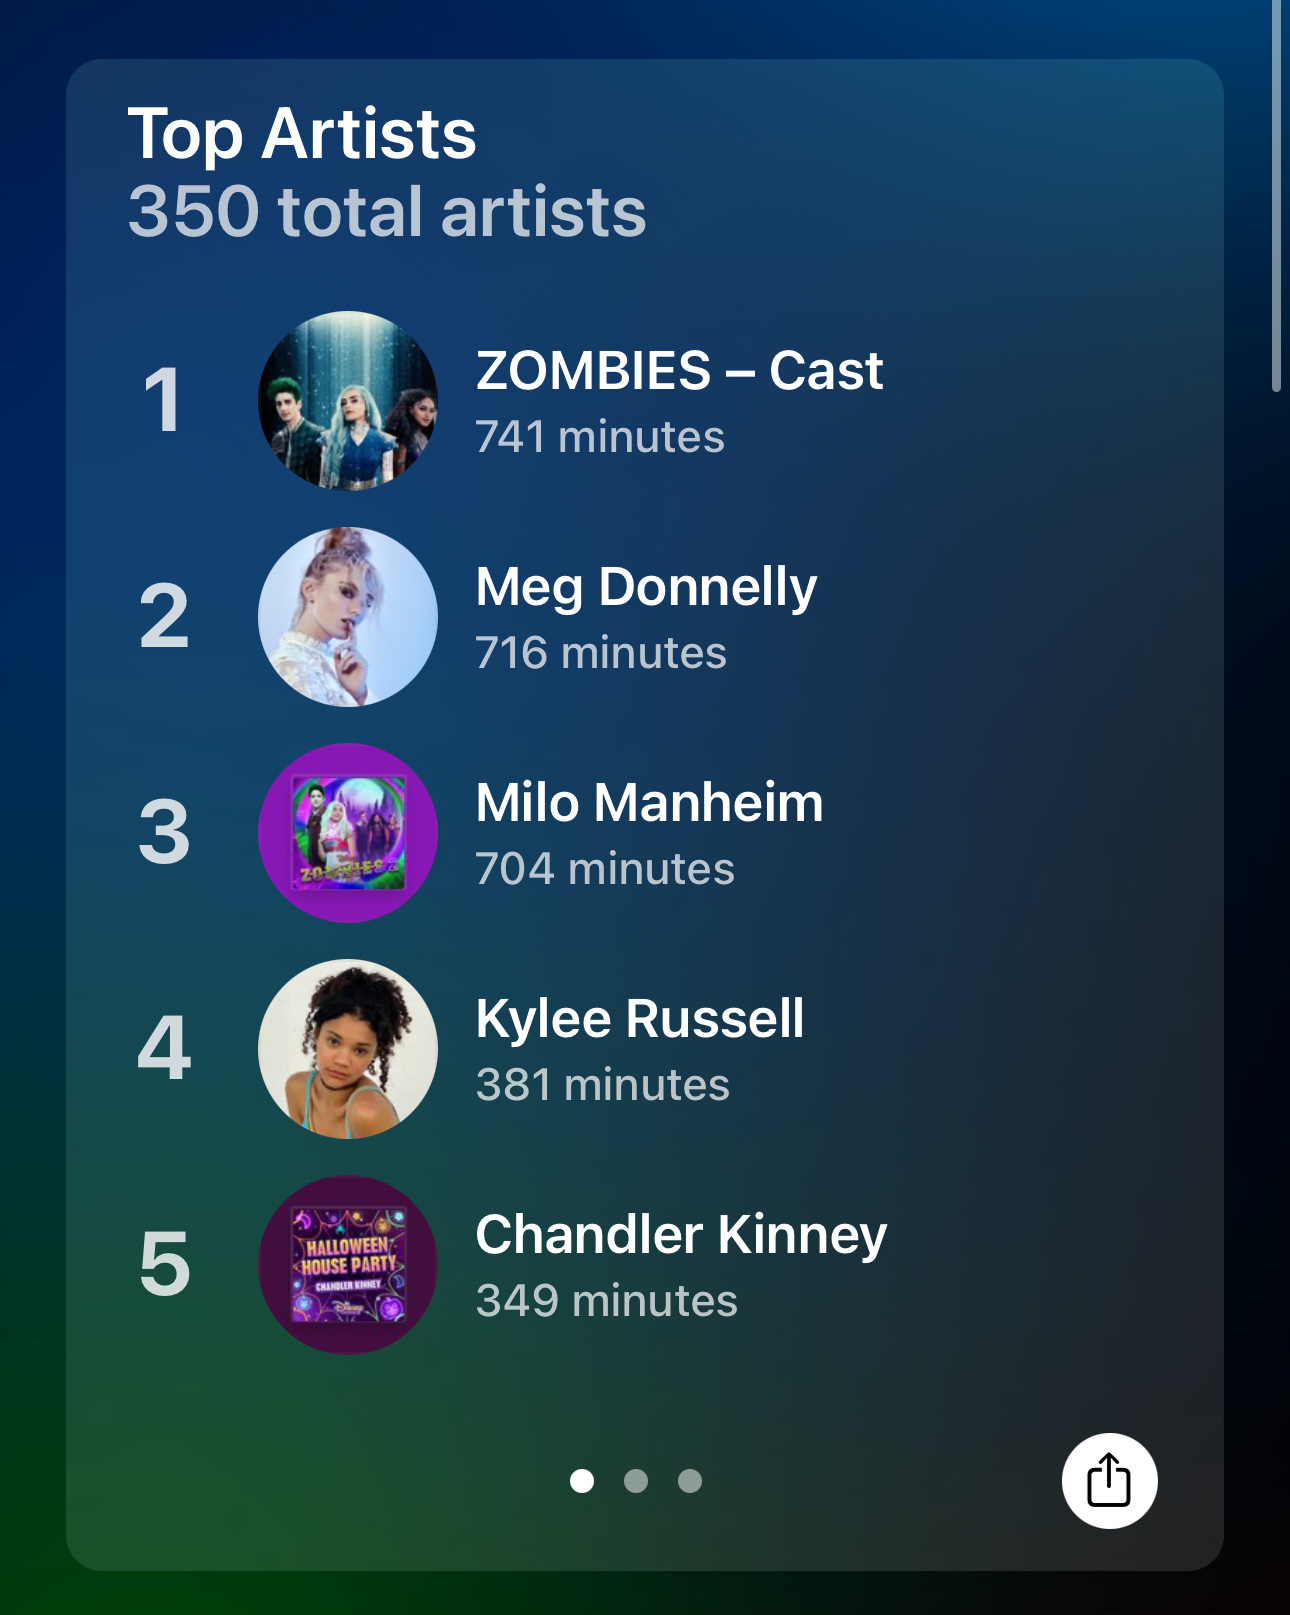 Top Artists&10;350 total artists&10;1&10;ZOMBIES - Cast&10;741 minutes&10;2&10;Meg Donnelly&10;716 minutes&10;3&10;Milo Manheim&10;704 minutes&10;4&10;Kylee Russell&10;381 minutes&10;5&10;.) HALLOWEENT&10;‹HOUSE PARTE&10;CHANDLER KINNEY.&10;Chandler Kinney&10;349 minutes